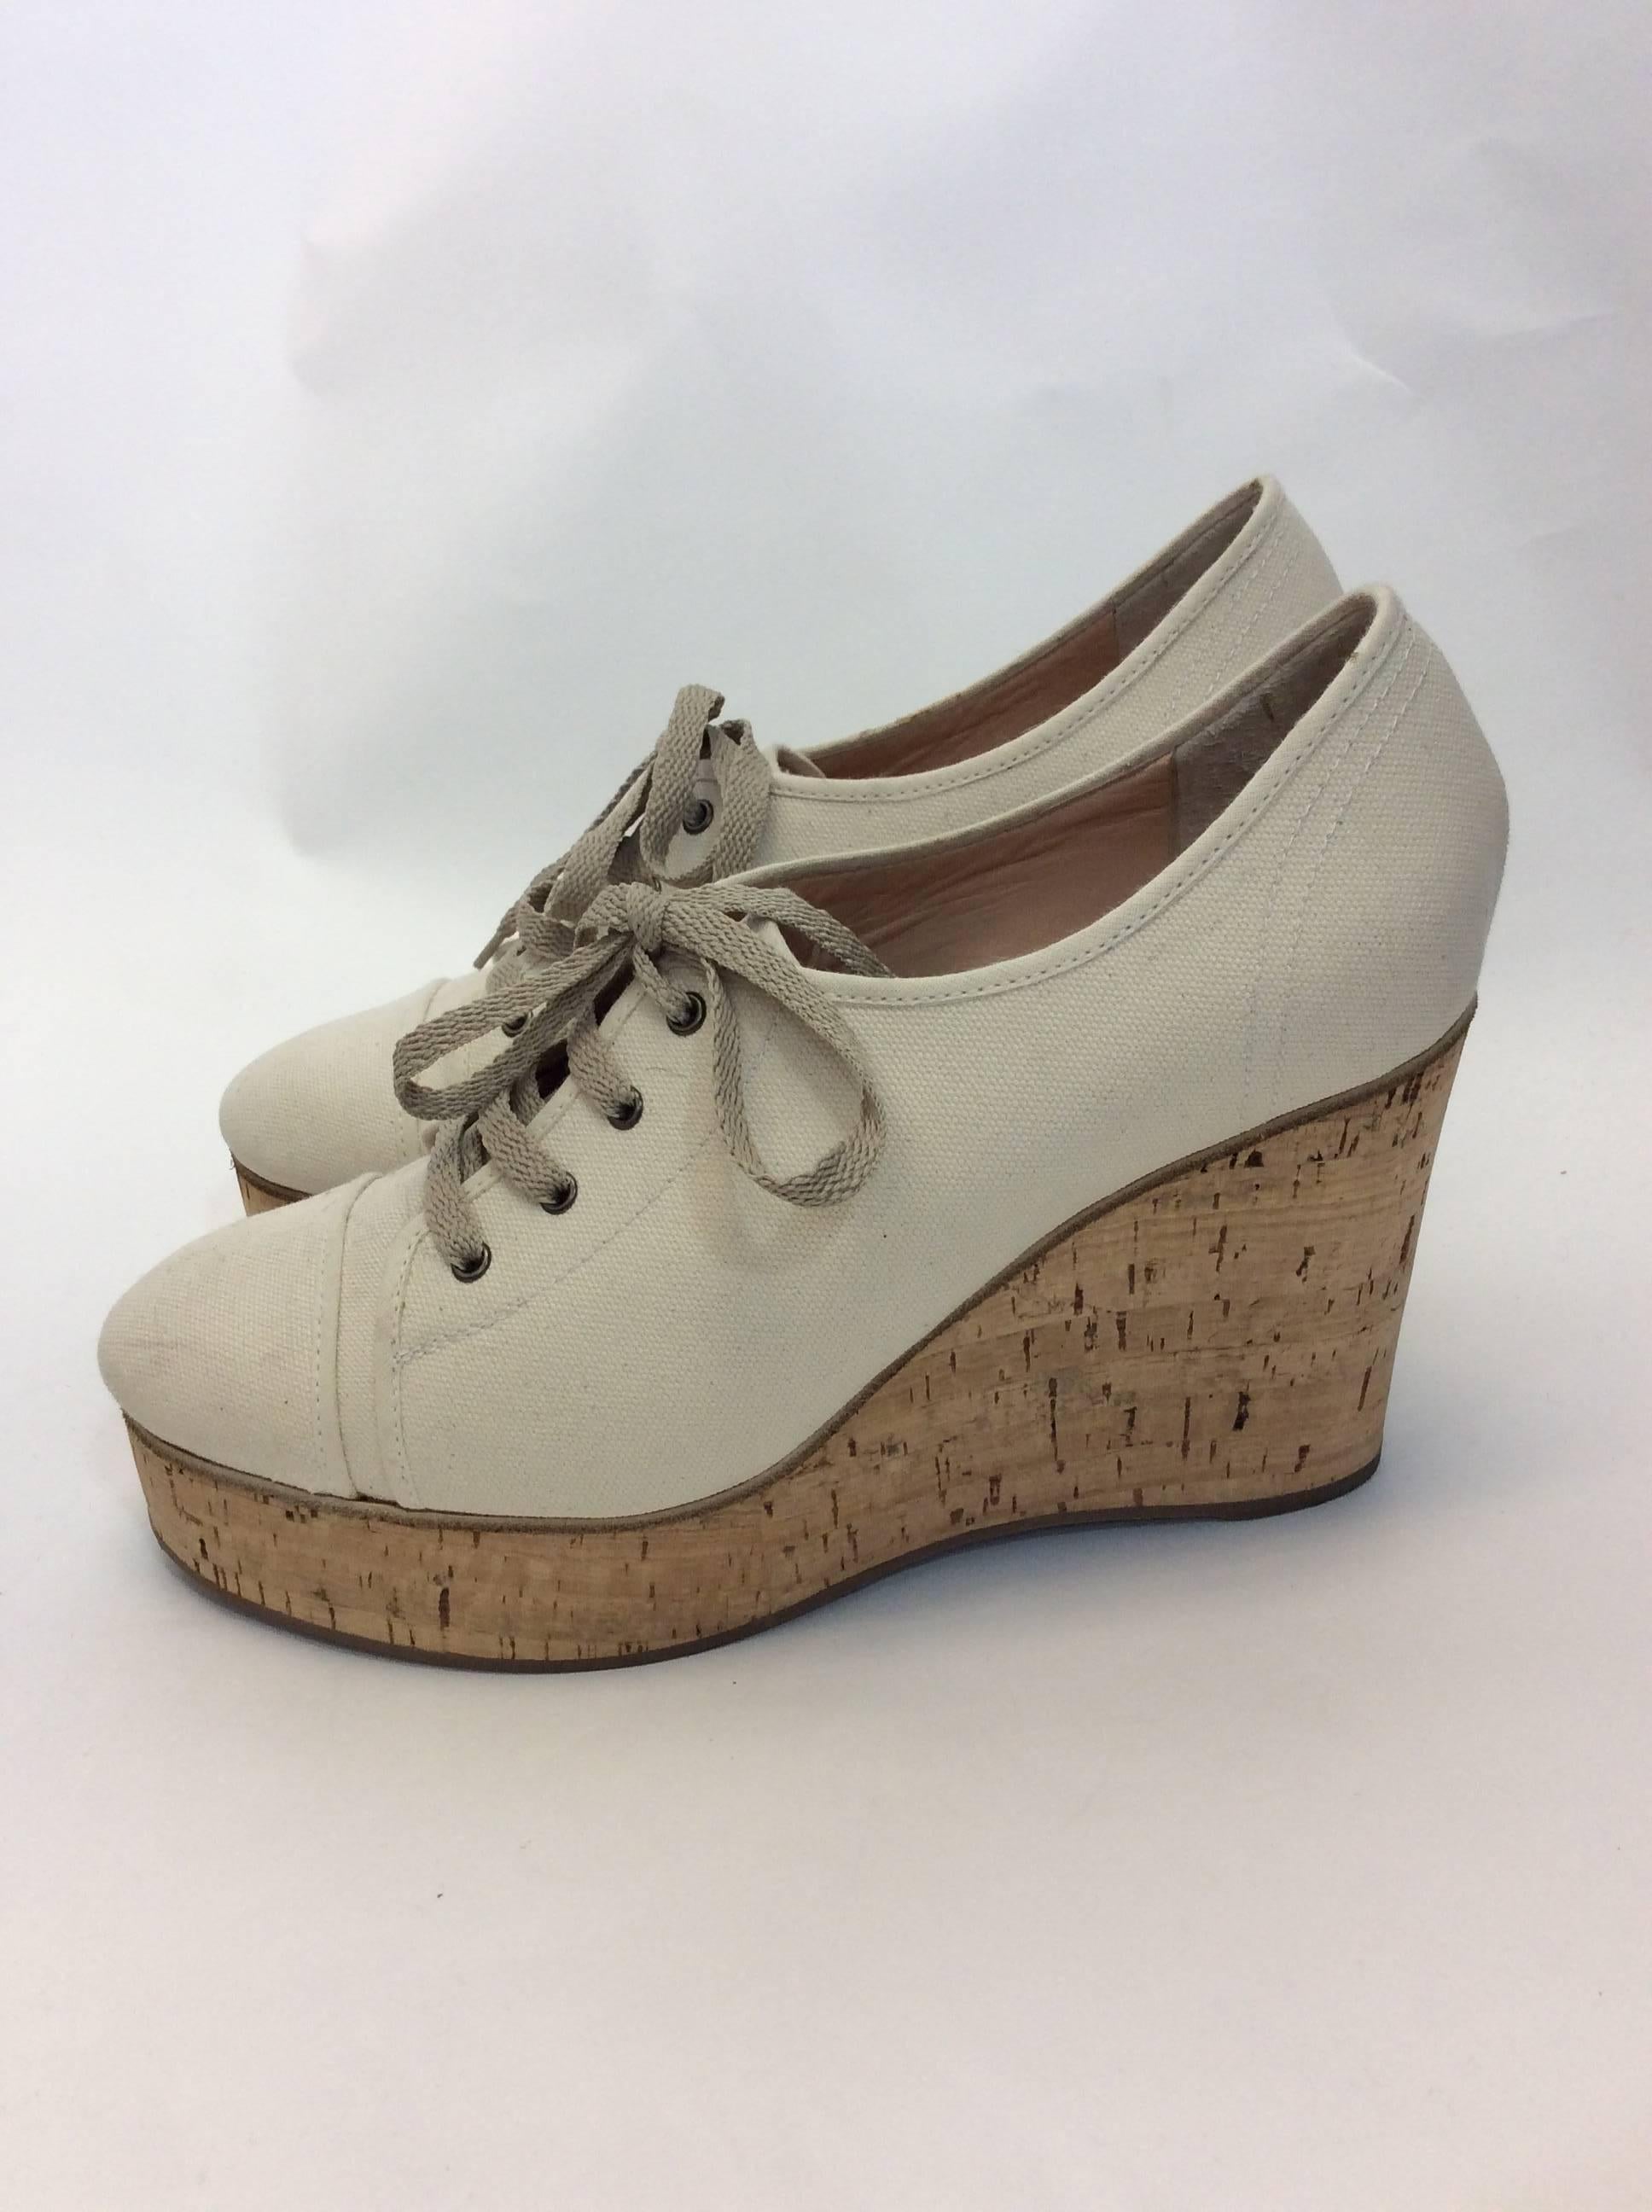 Chloe Cream Canvas Lace Up Wedge
4 inch wedge
$225
Size 39.5 
Off white/Cream
